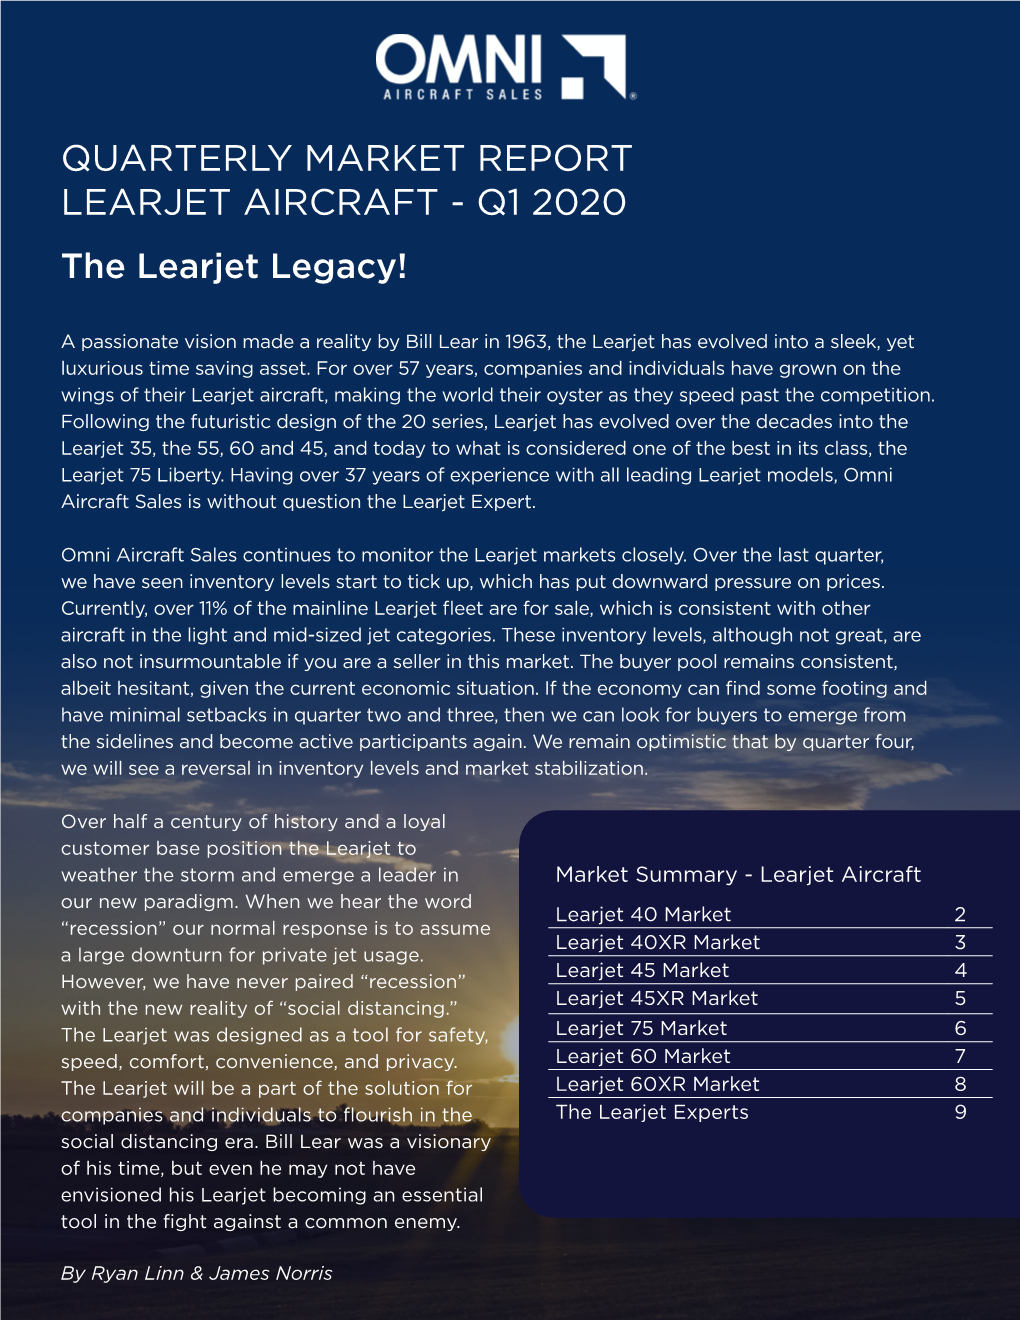 QUARTERLY MARKET REPORT LEARJET AIRCRAFT - Q1 2020 the Learjet Legacy!